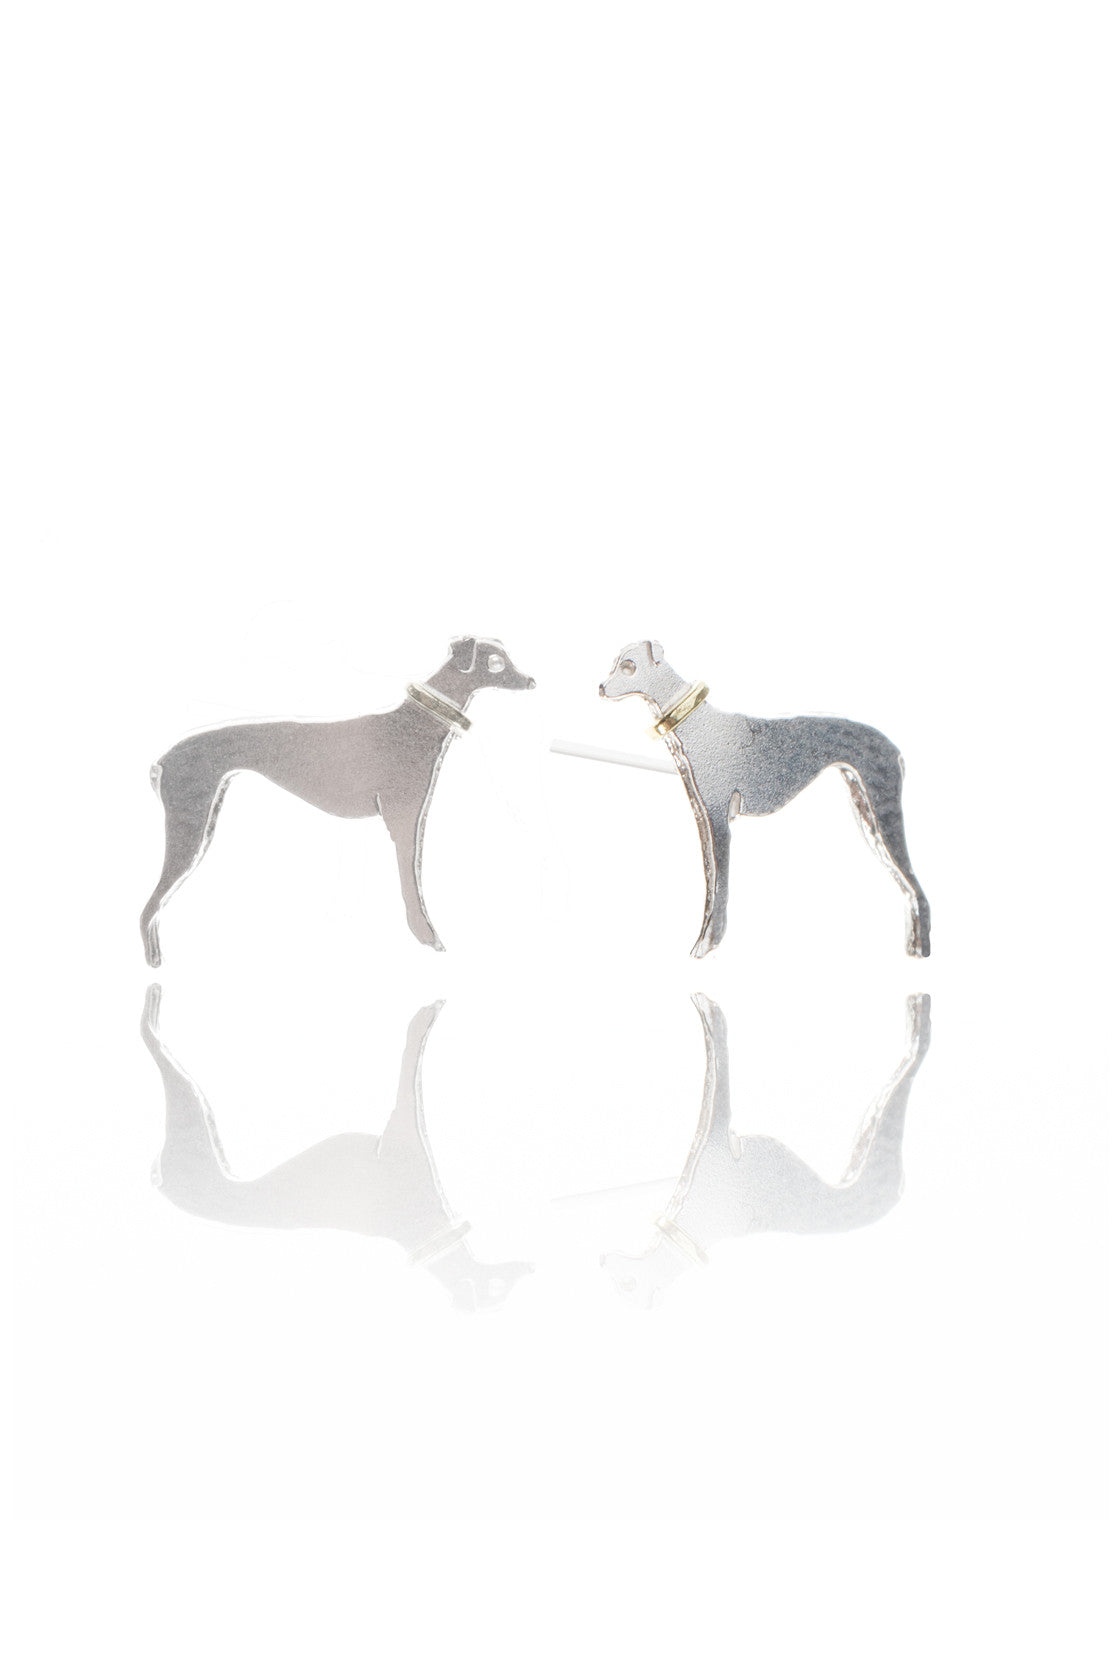 Silver greyhound stud earrings with contrasting gold collar. 